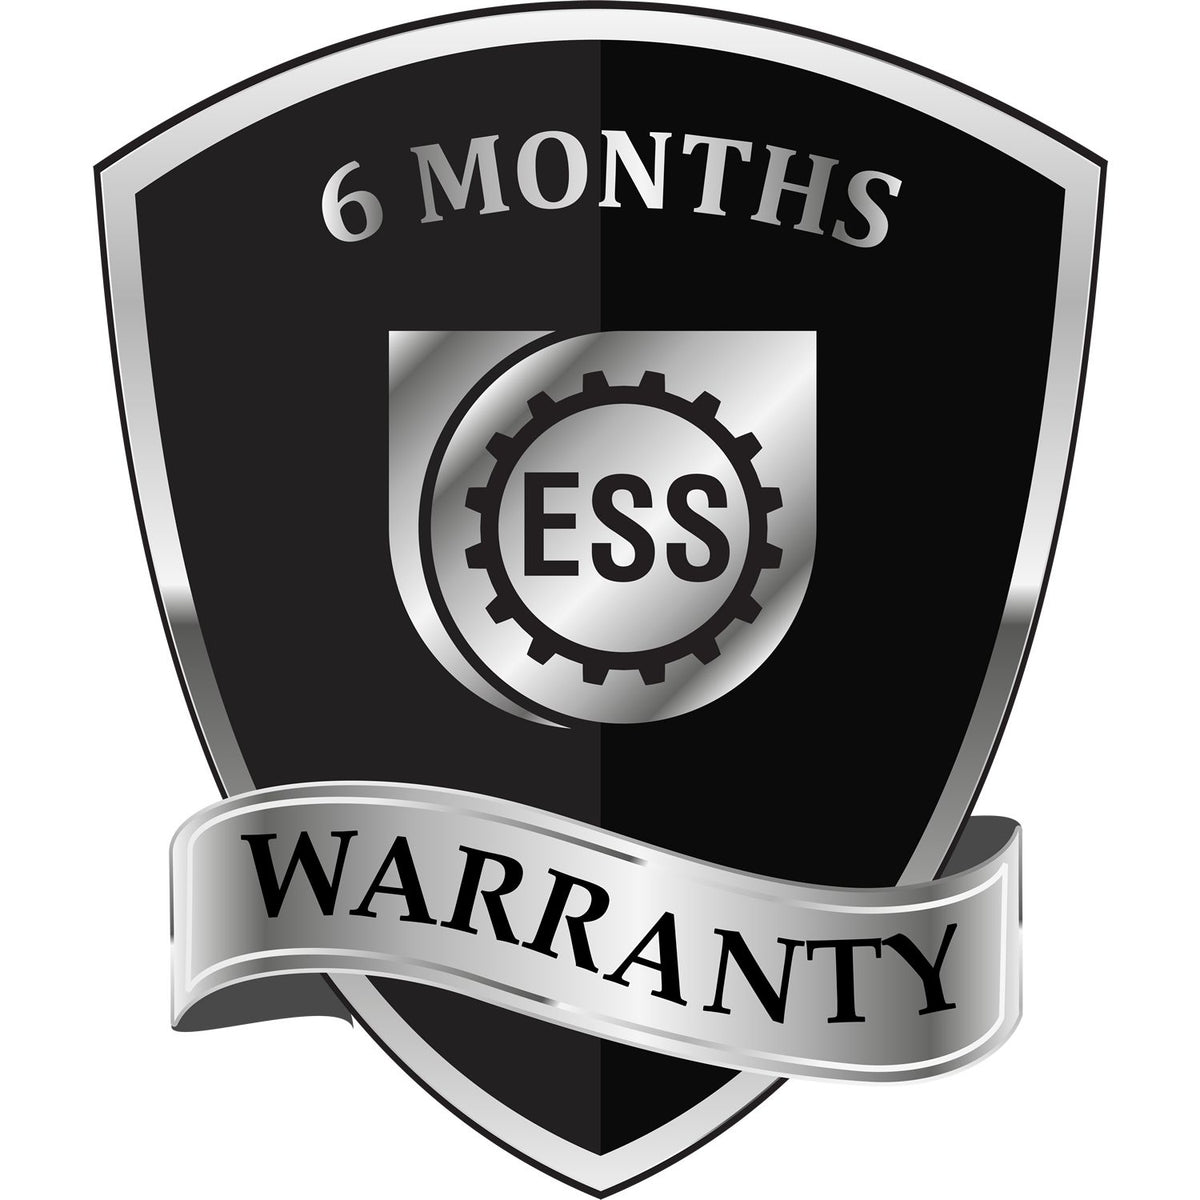 A badge or emblem showing a warranty icon for the Slim Pre-Inked Illinois Professional Engineer Seal Stamp